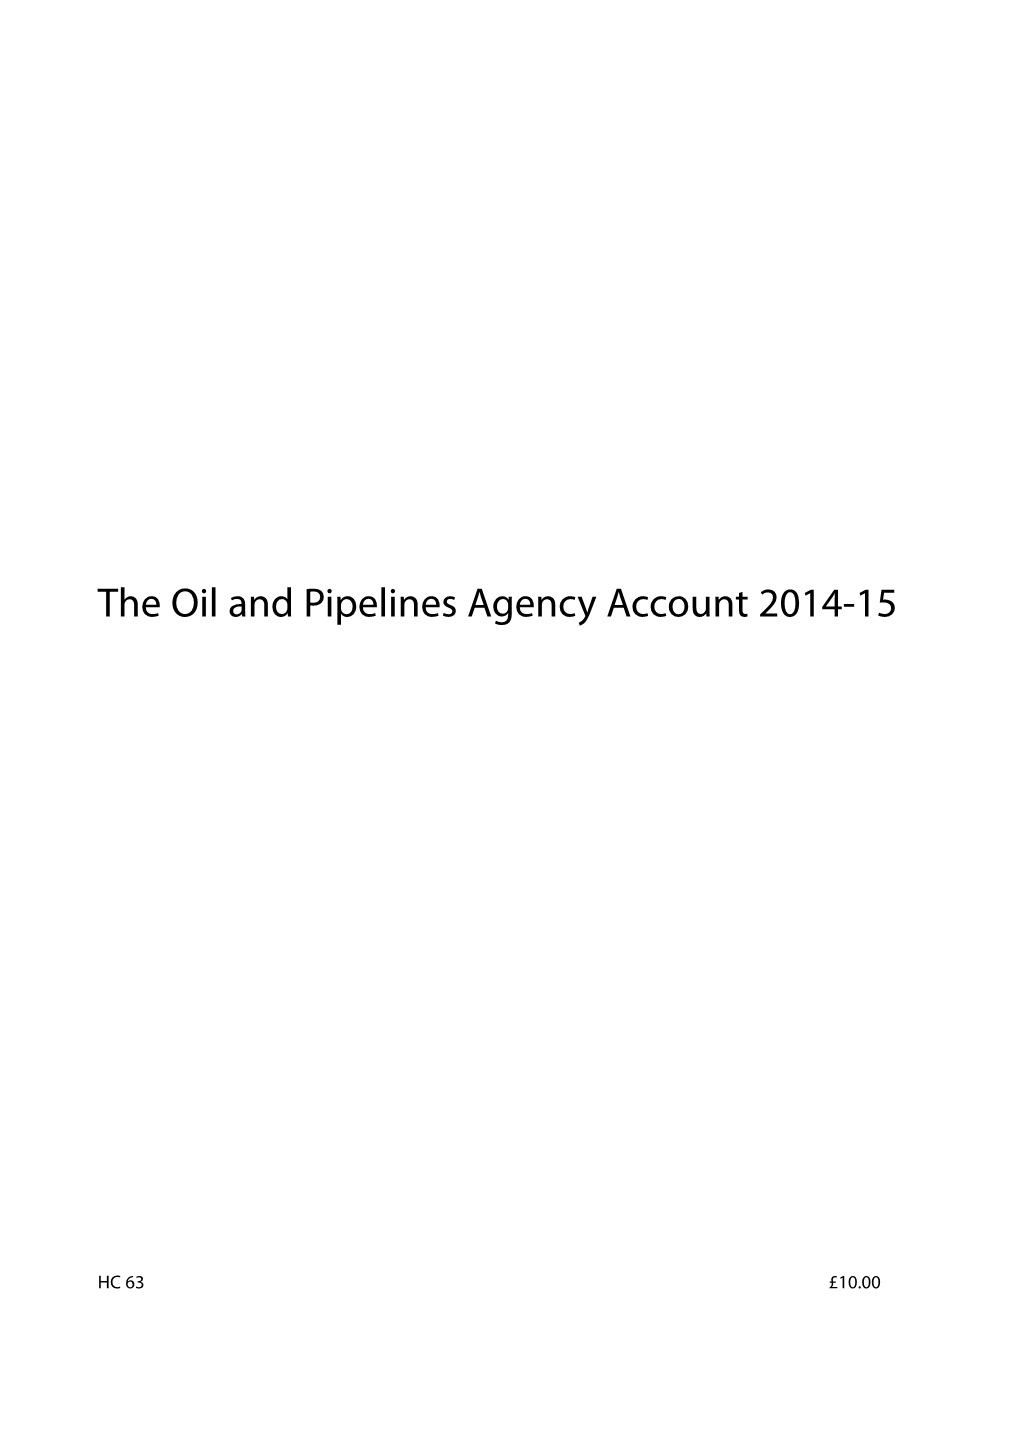 The Oil and Pipelines Agency Account 2014-15